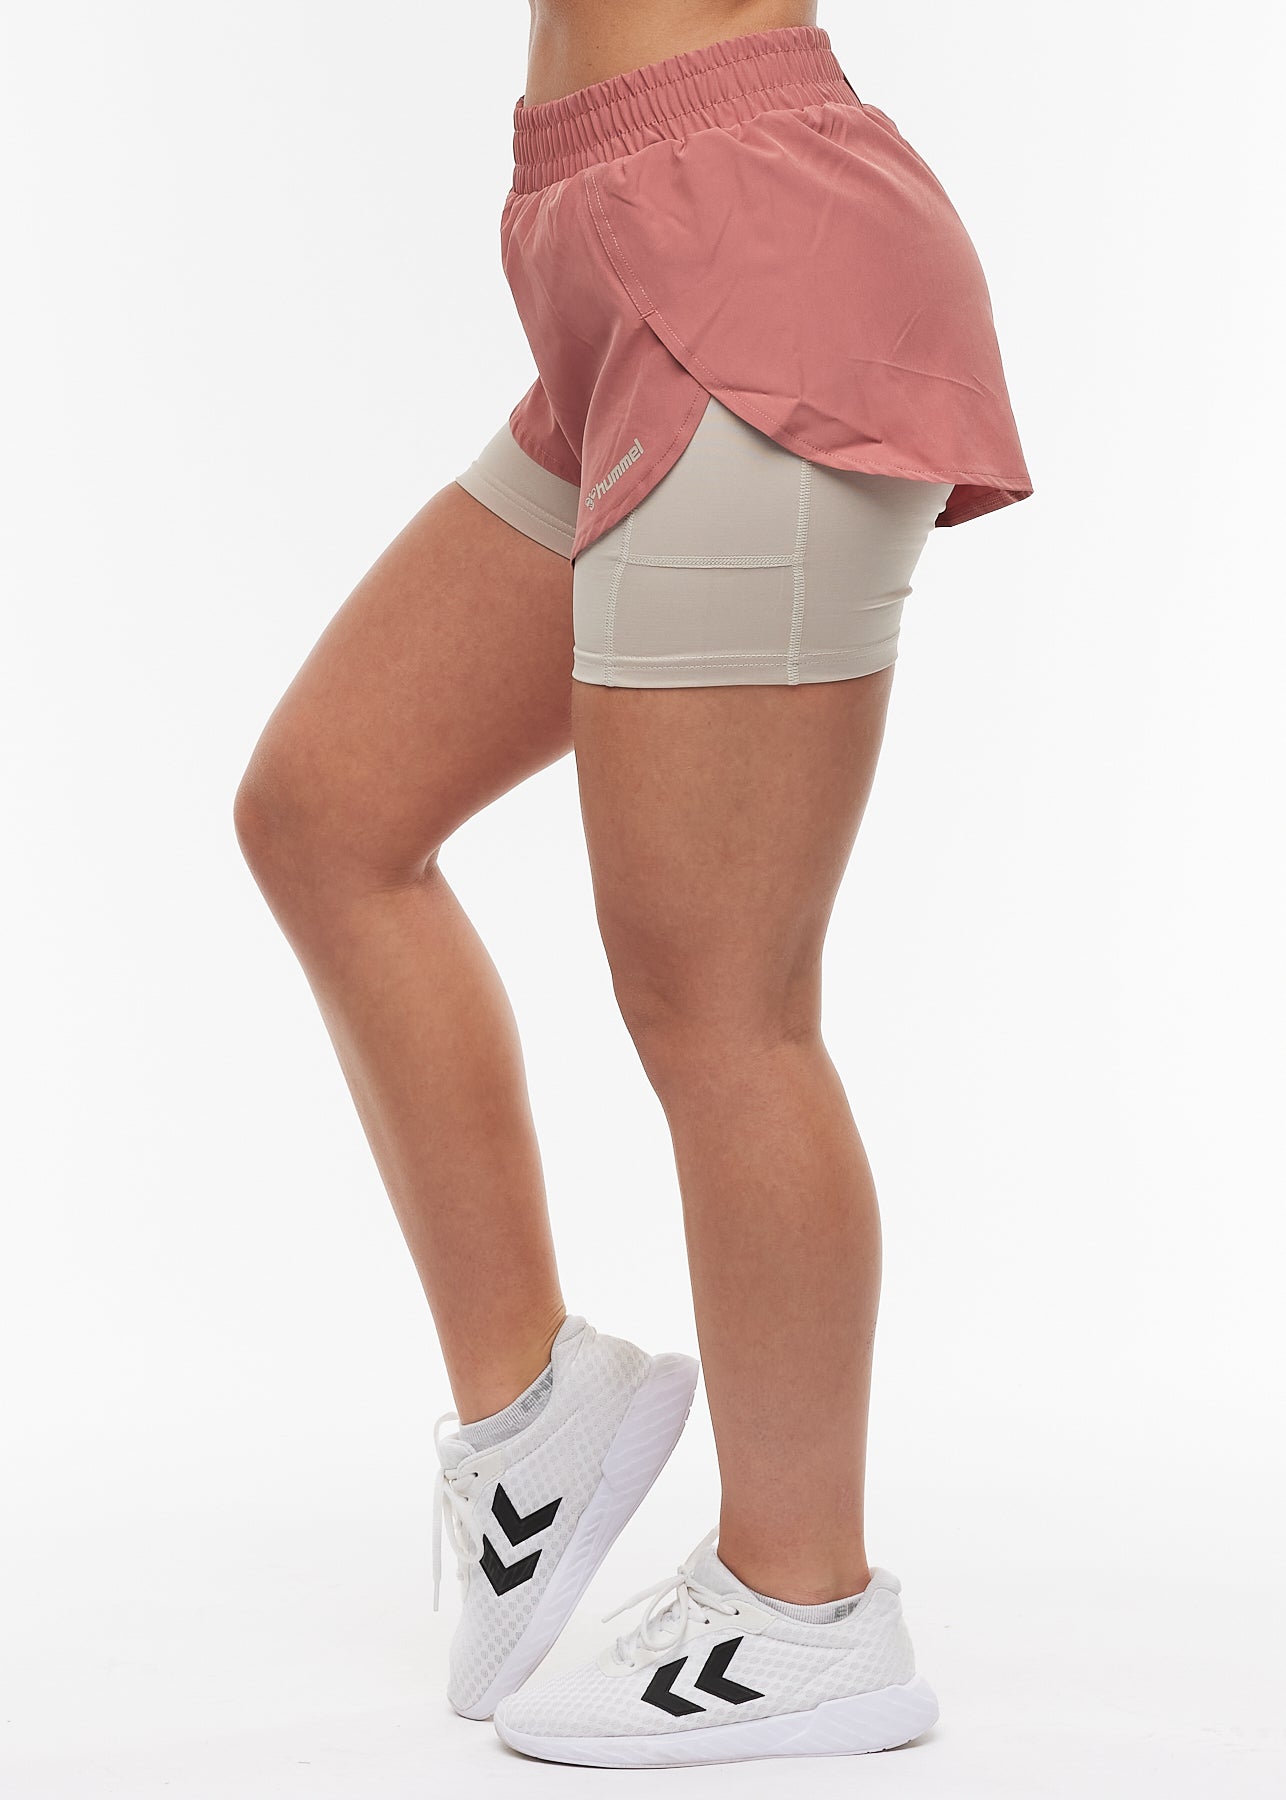 HUMMEL - TRACK 2 IN 1 SHORTS WITHERED ROSE - XS